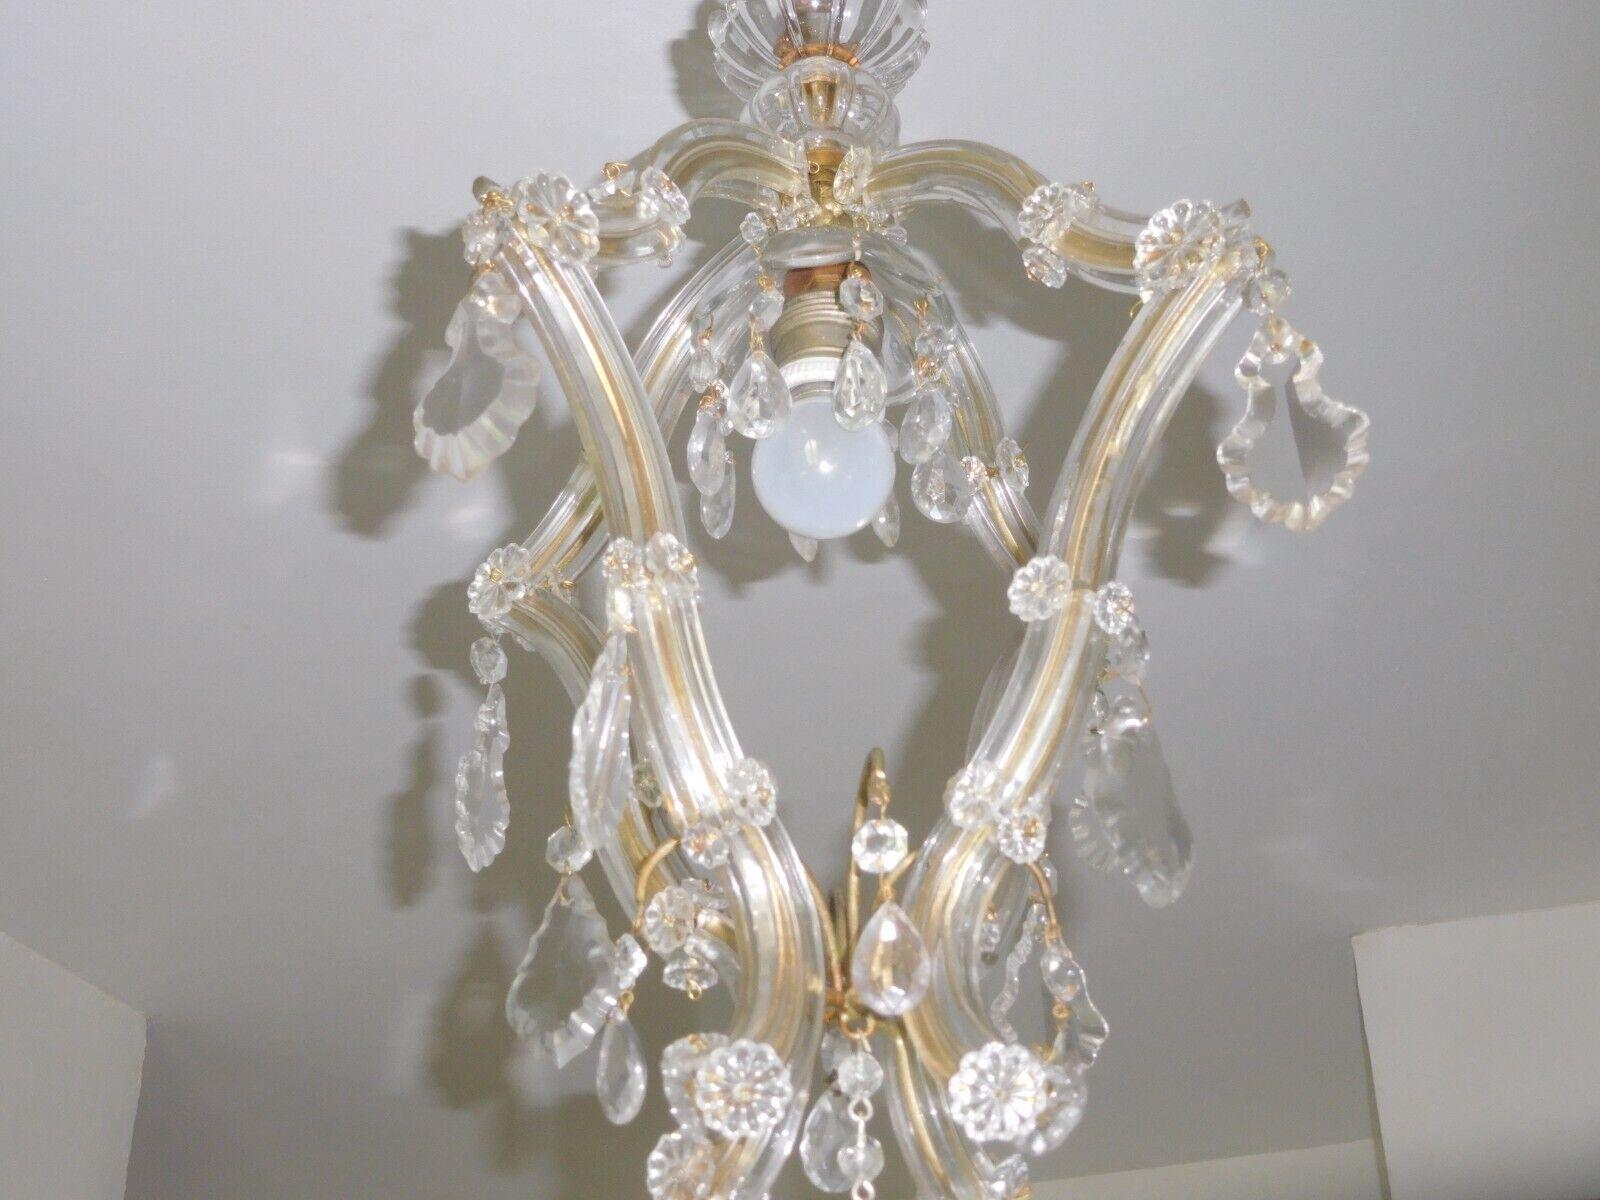 1960's Hollywood Regency style Murano Art Glass Ceiling Lantern From Italy For Sale 3